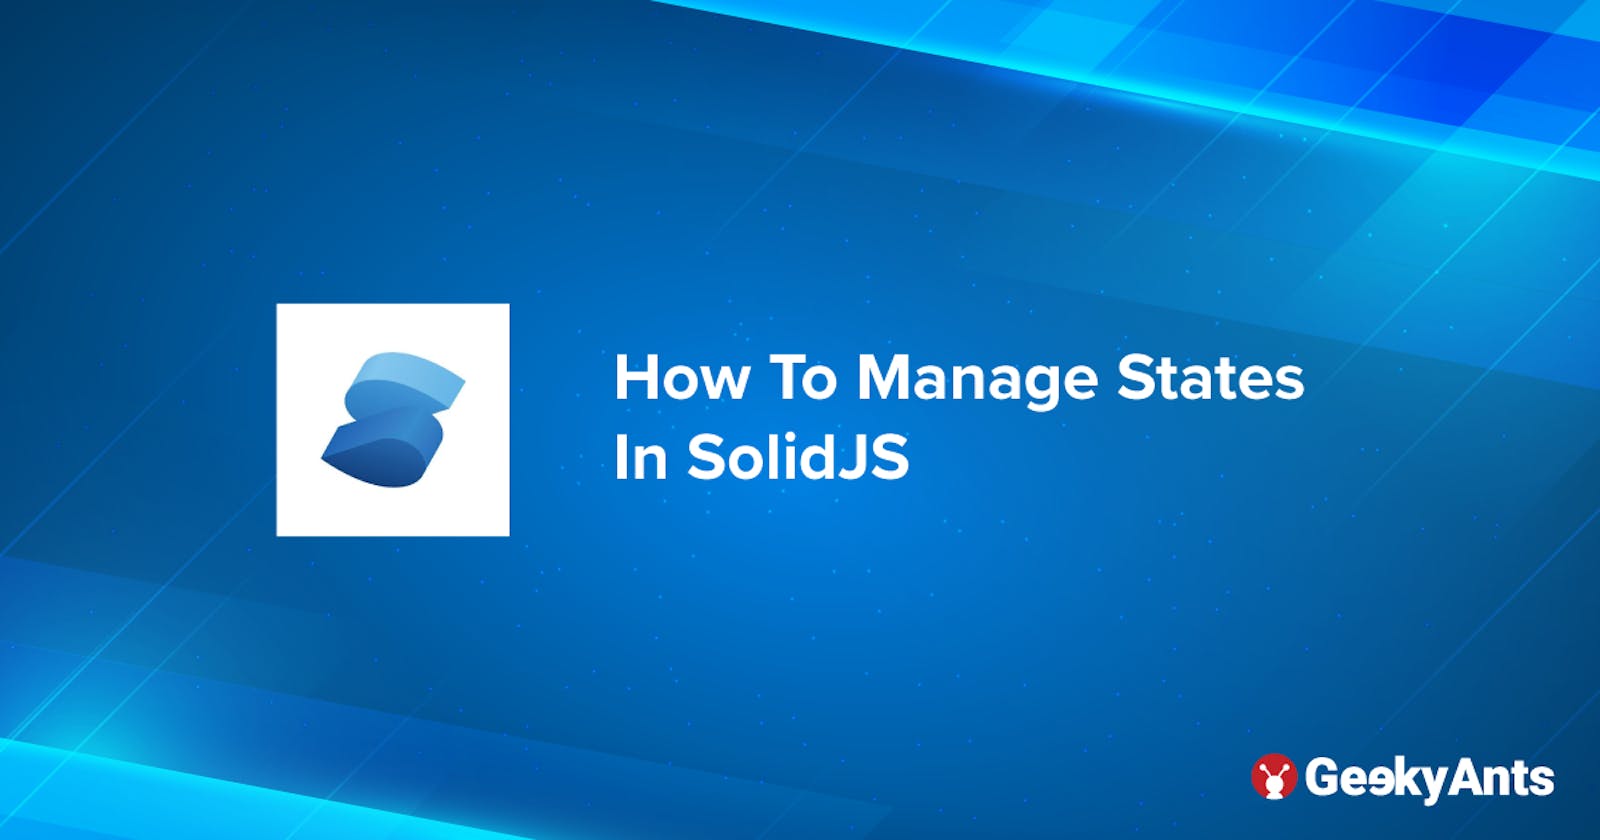 How To Manage States In SolidJS